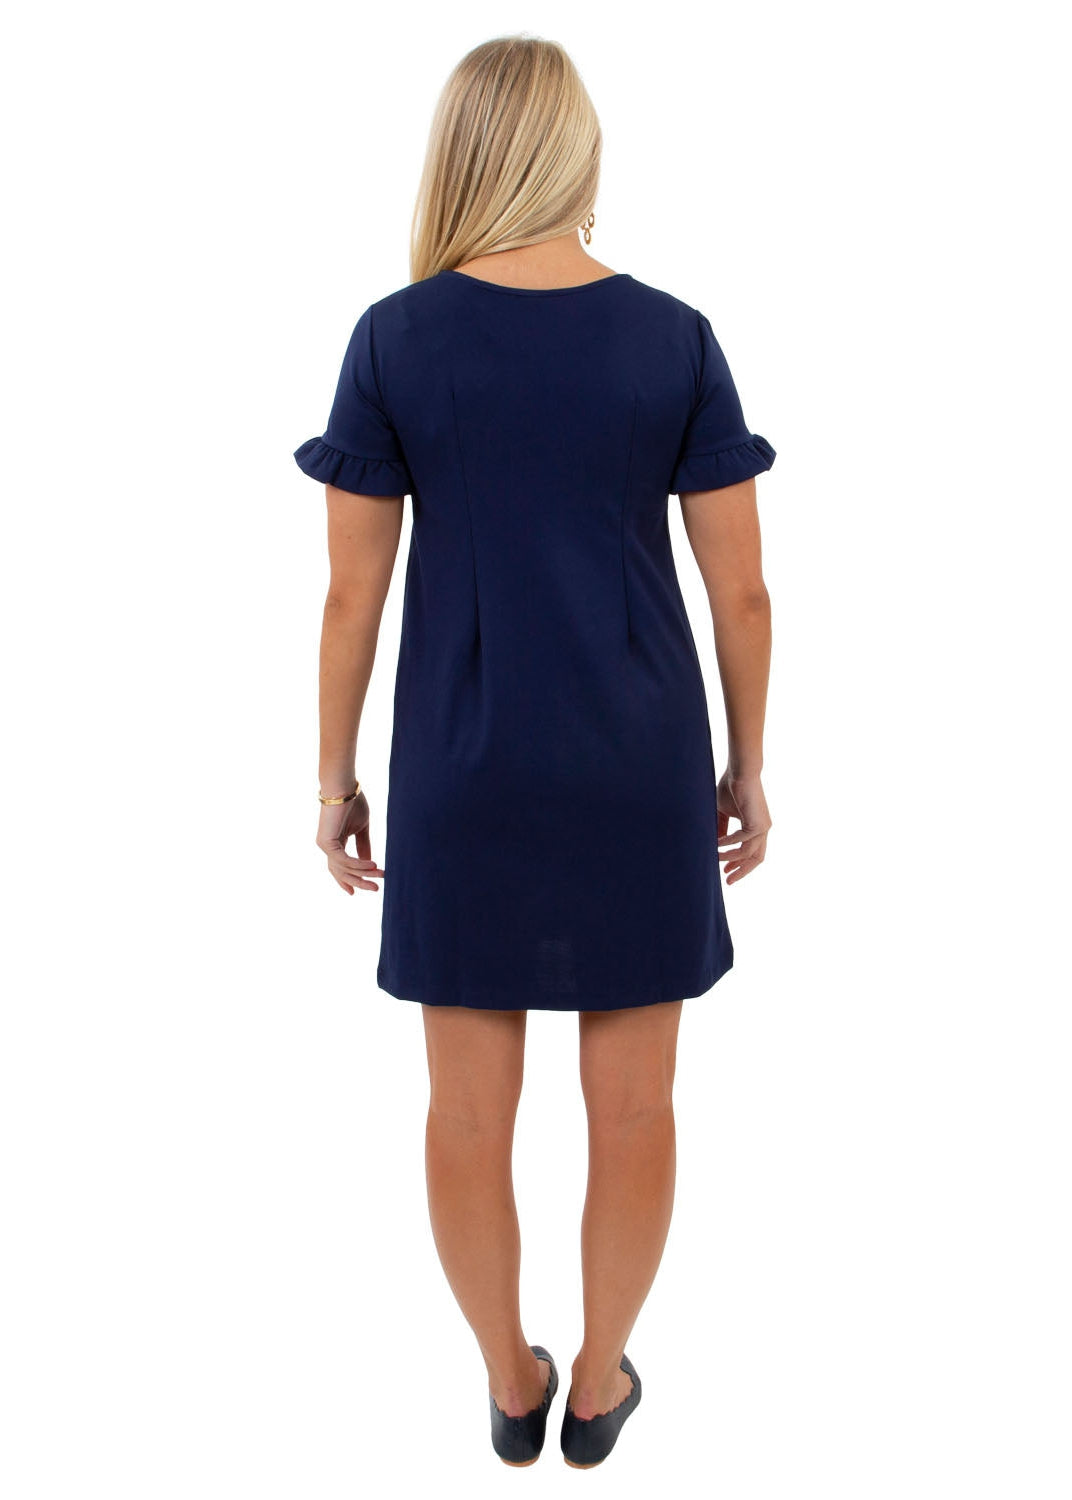 Coco Dress - Solid Navy - FINAL SALE-2